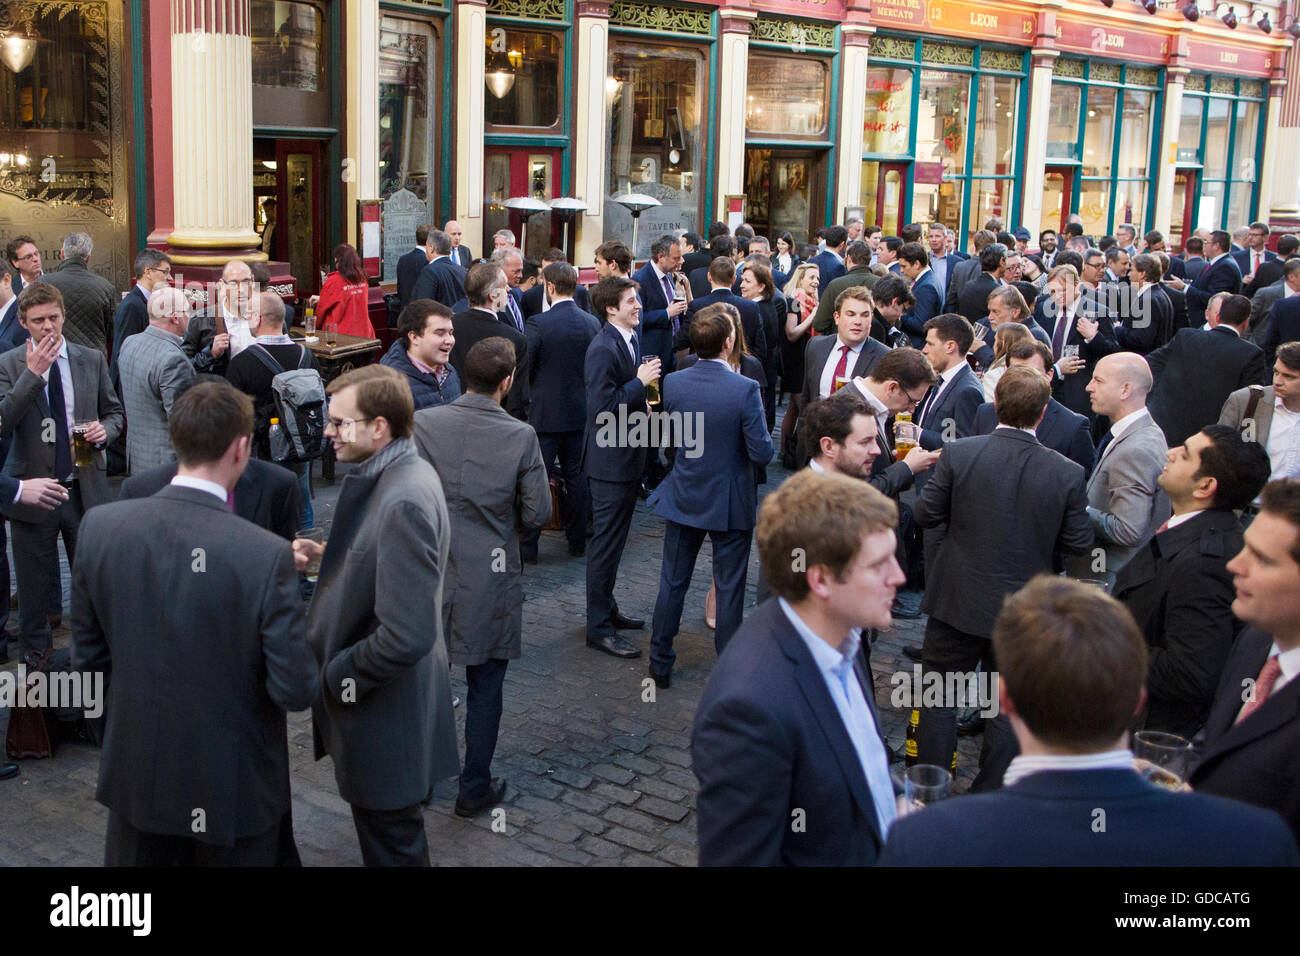 City workers having a drink at pub in Leadenhall Market, London England UK Stock Photo